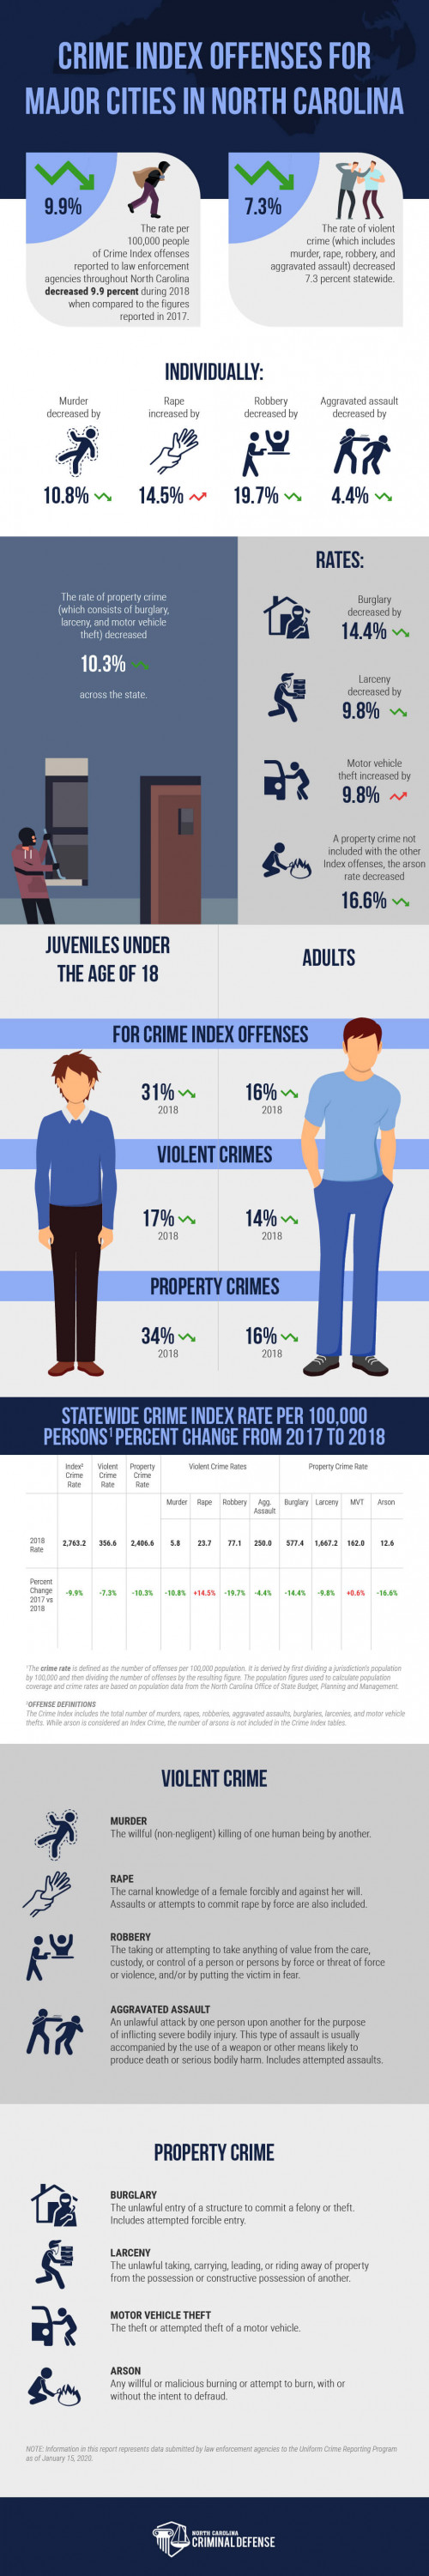 "Hi there, we recently created this infographic to highlight crime statistics within the major cities of North Carolina. We love it if you would be willing to include it on your website so we can help get the word out. If you require a blog or additional content please let us know and we'll work with you. Kindly visit https://criminaldefensenc.com/crime-statistics-of-north-carolinas-biggest-cities-infographic for more information.

Thanks!
"